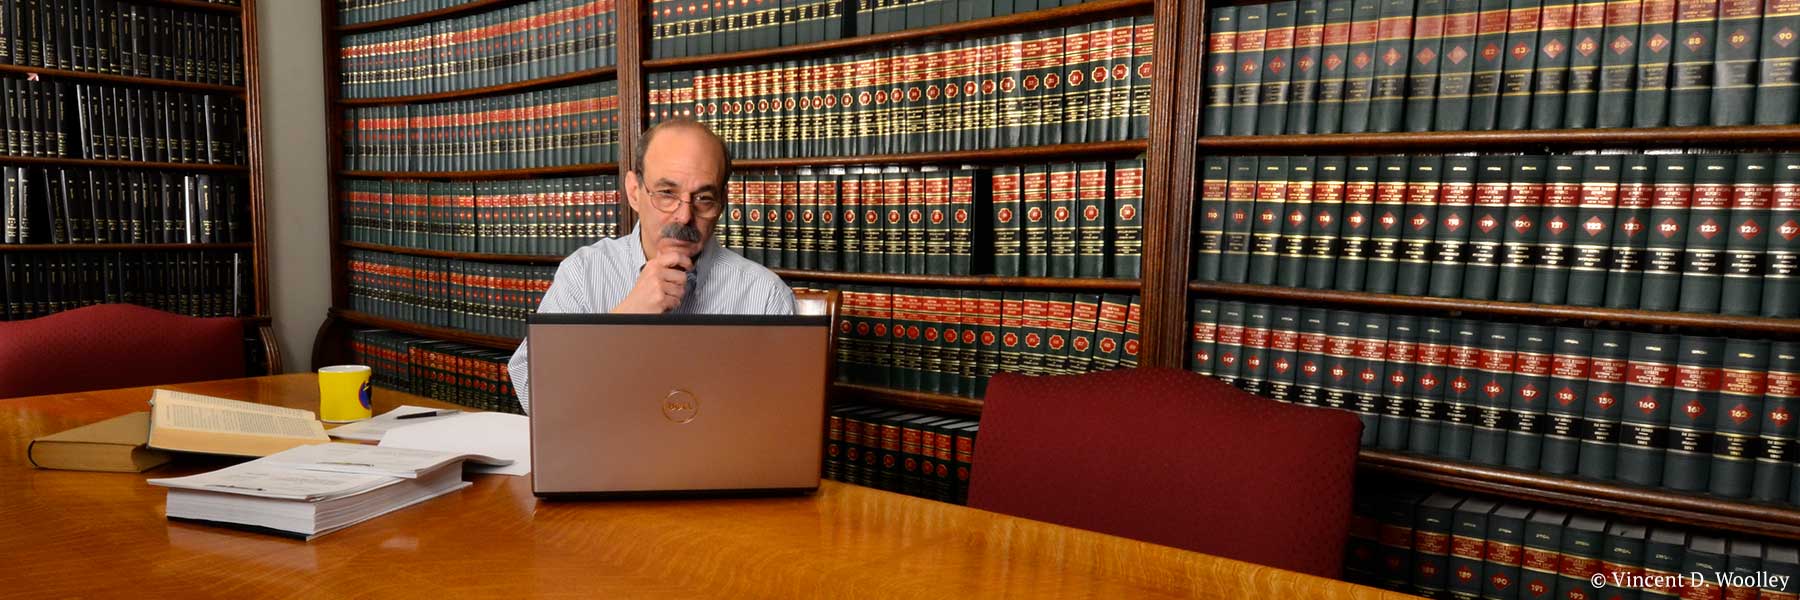 Warren County, New York attorney Neil H. Lebowitz conducting legal research in law library. Photographer: Vincent D. Woolley. Copyright owner-licensor: Vincent D. Woolley. Copyright licensee: Neil H. Lebowitz.